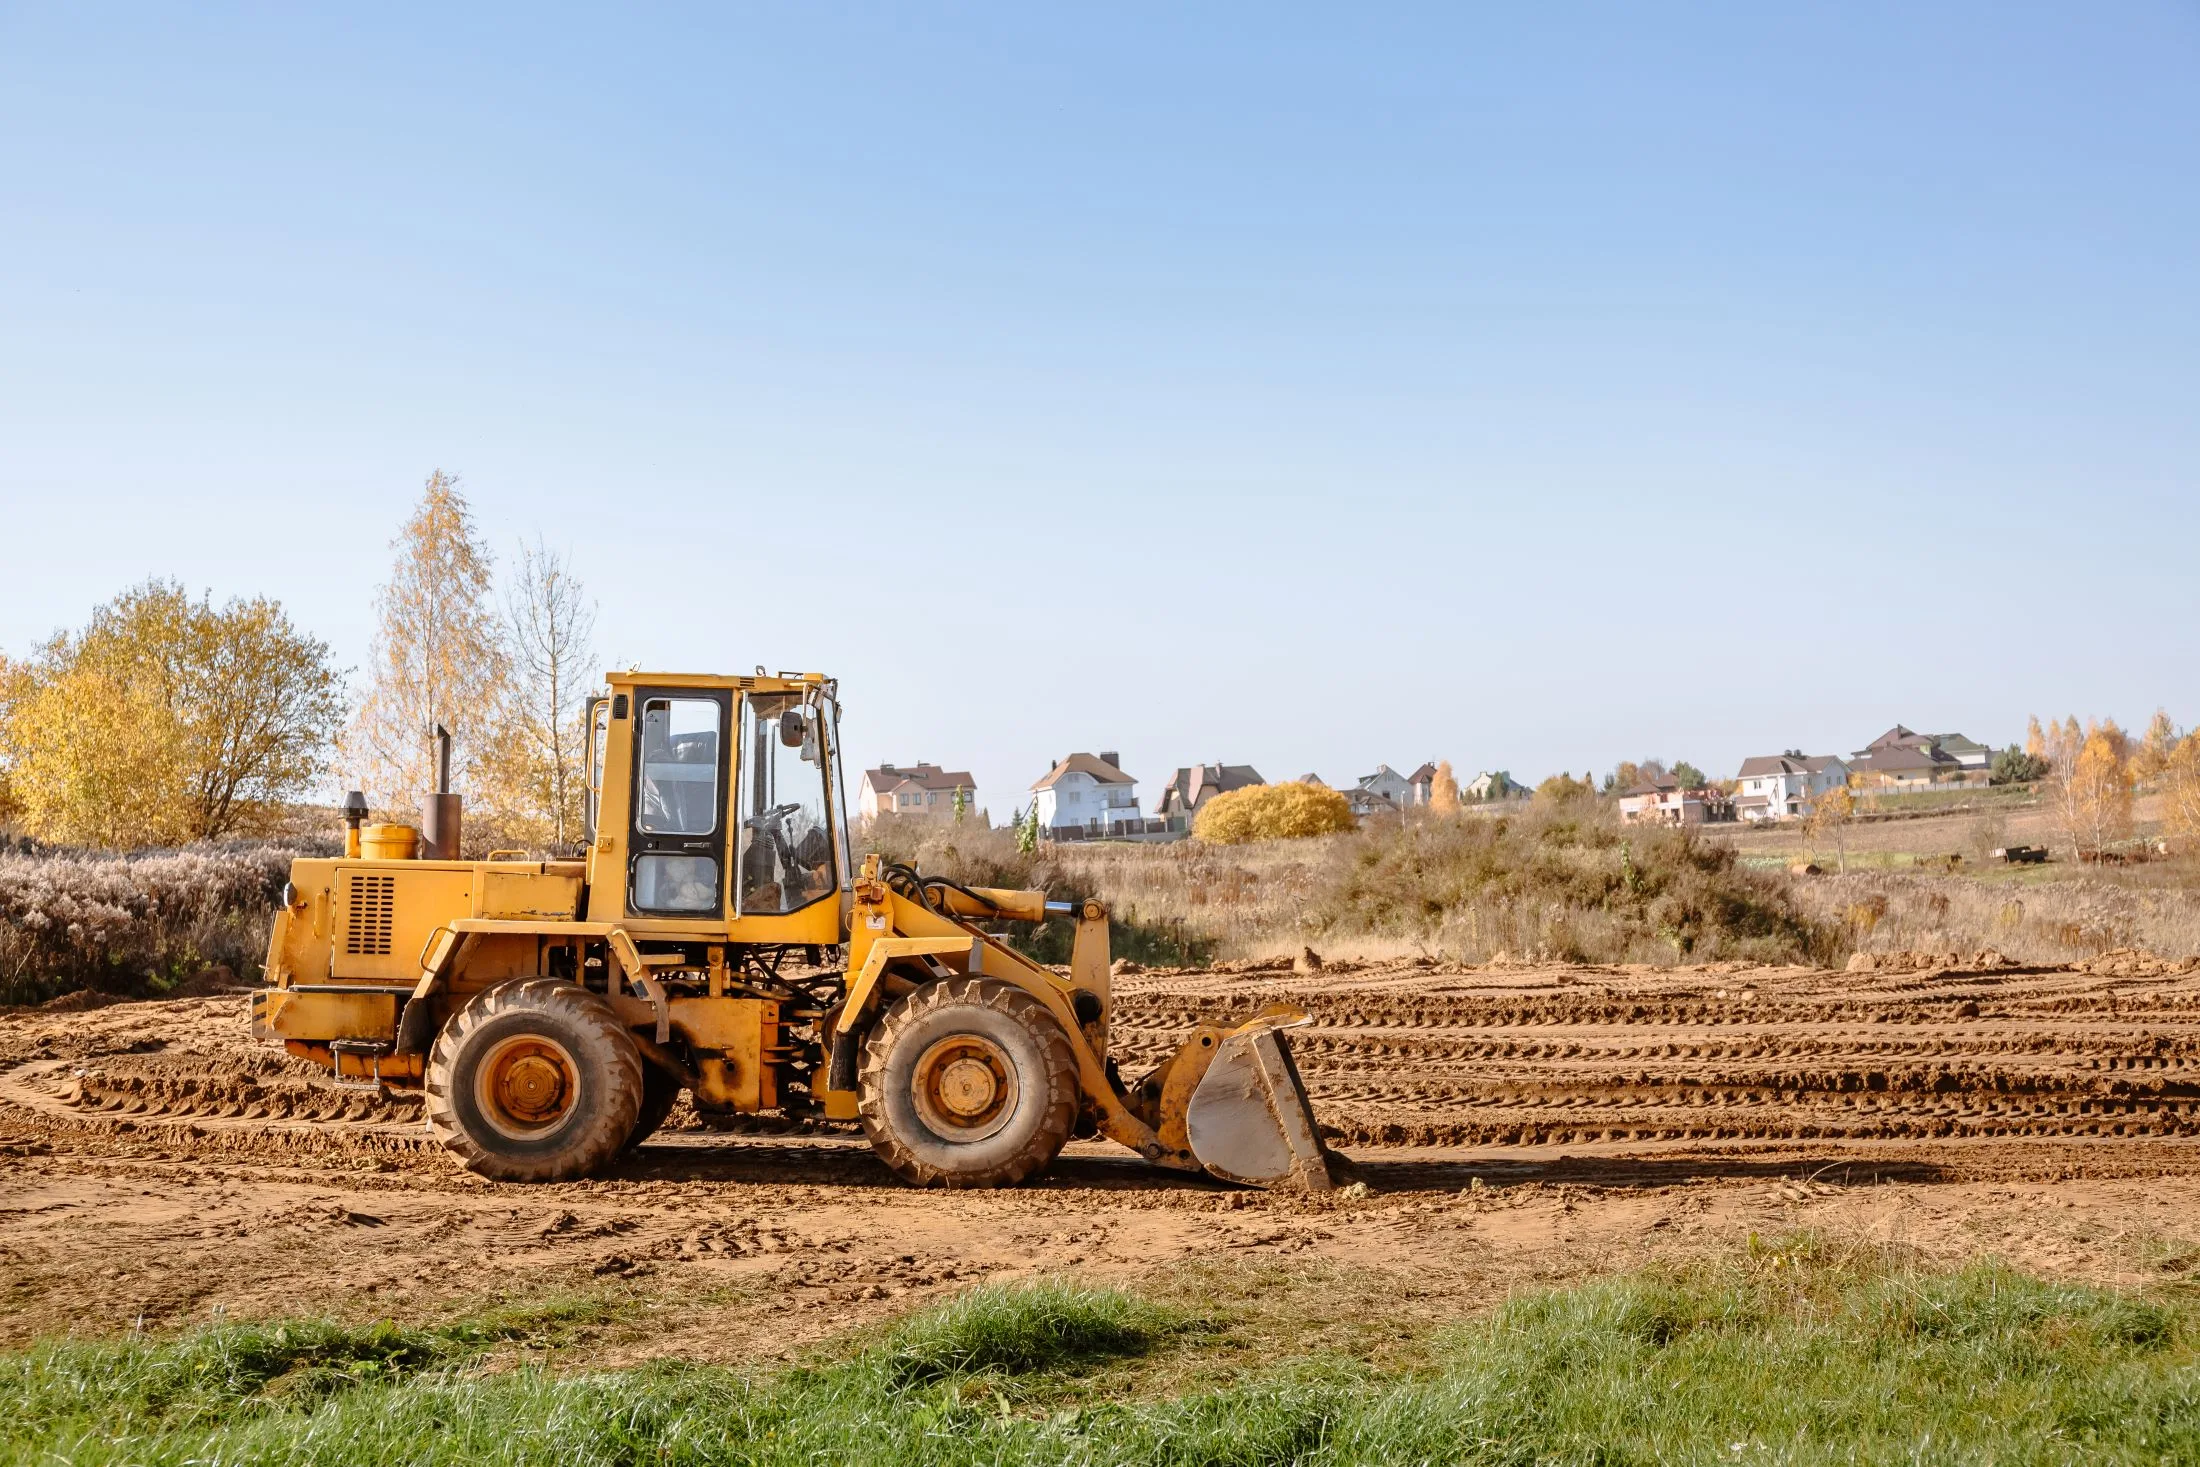 5 Reasons You May Need Land Clearing Services